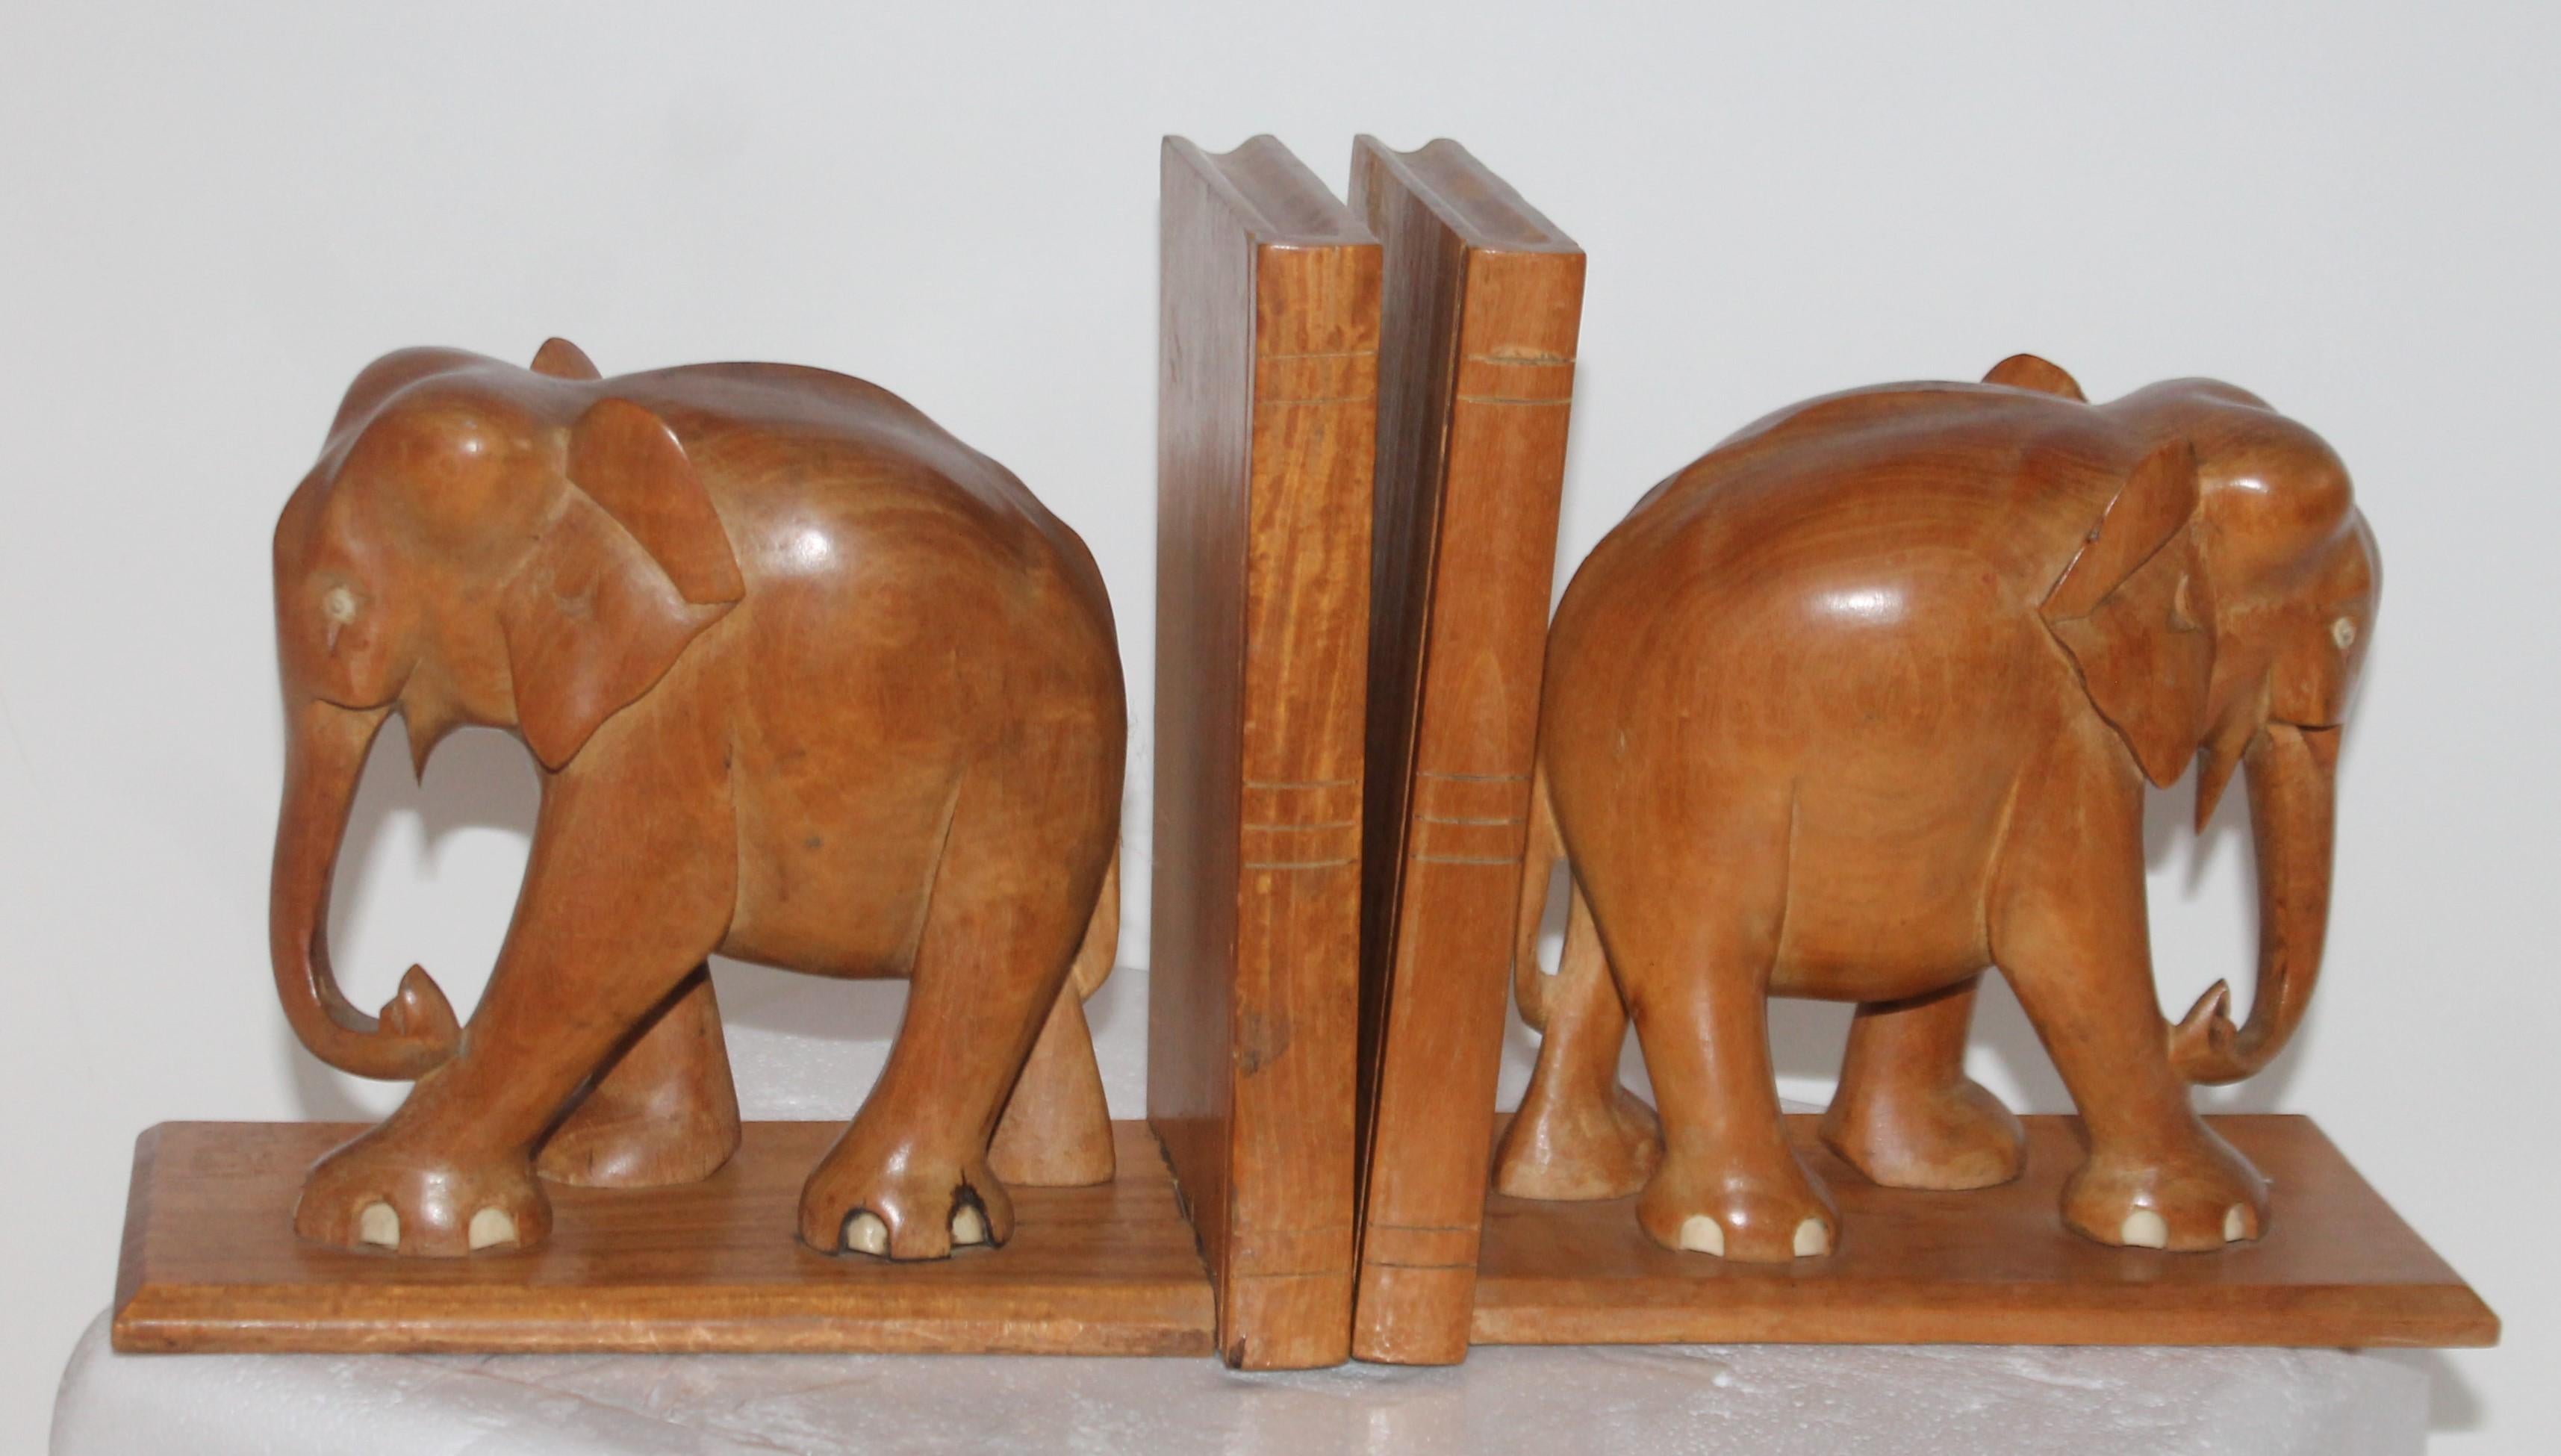 This fine detailed hand carved elephant bookends with inlaid bone eyes and toes. The construction of the wood bases are all hand dovetailed. They are very well carved and heavy.